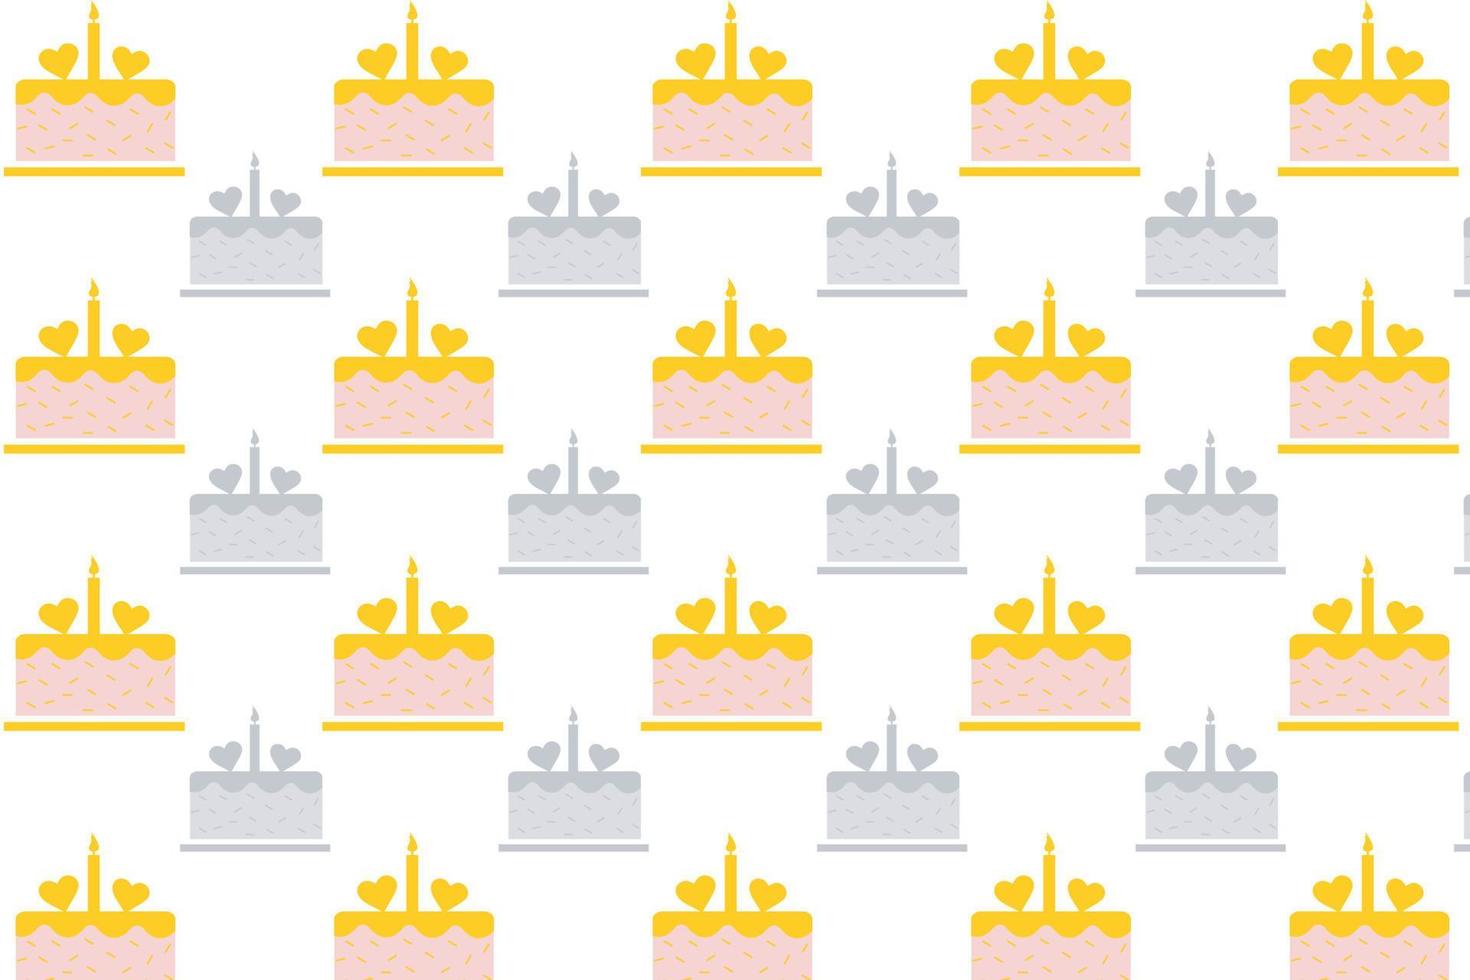 Abstract Birthday Cake Pattern Background vector